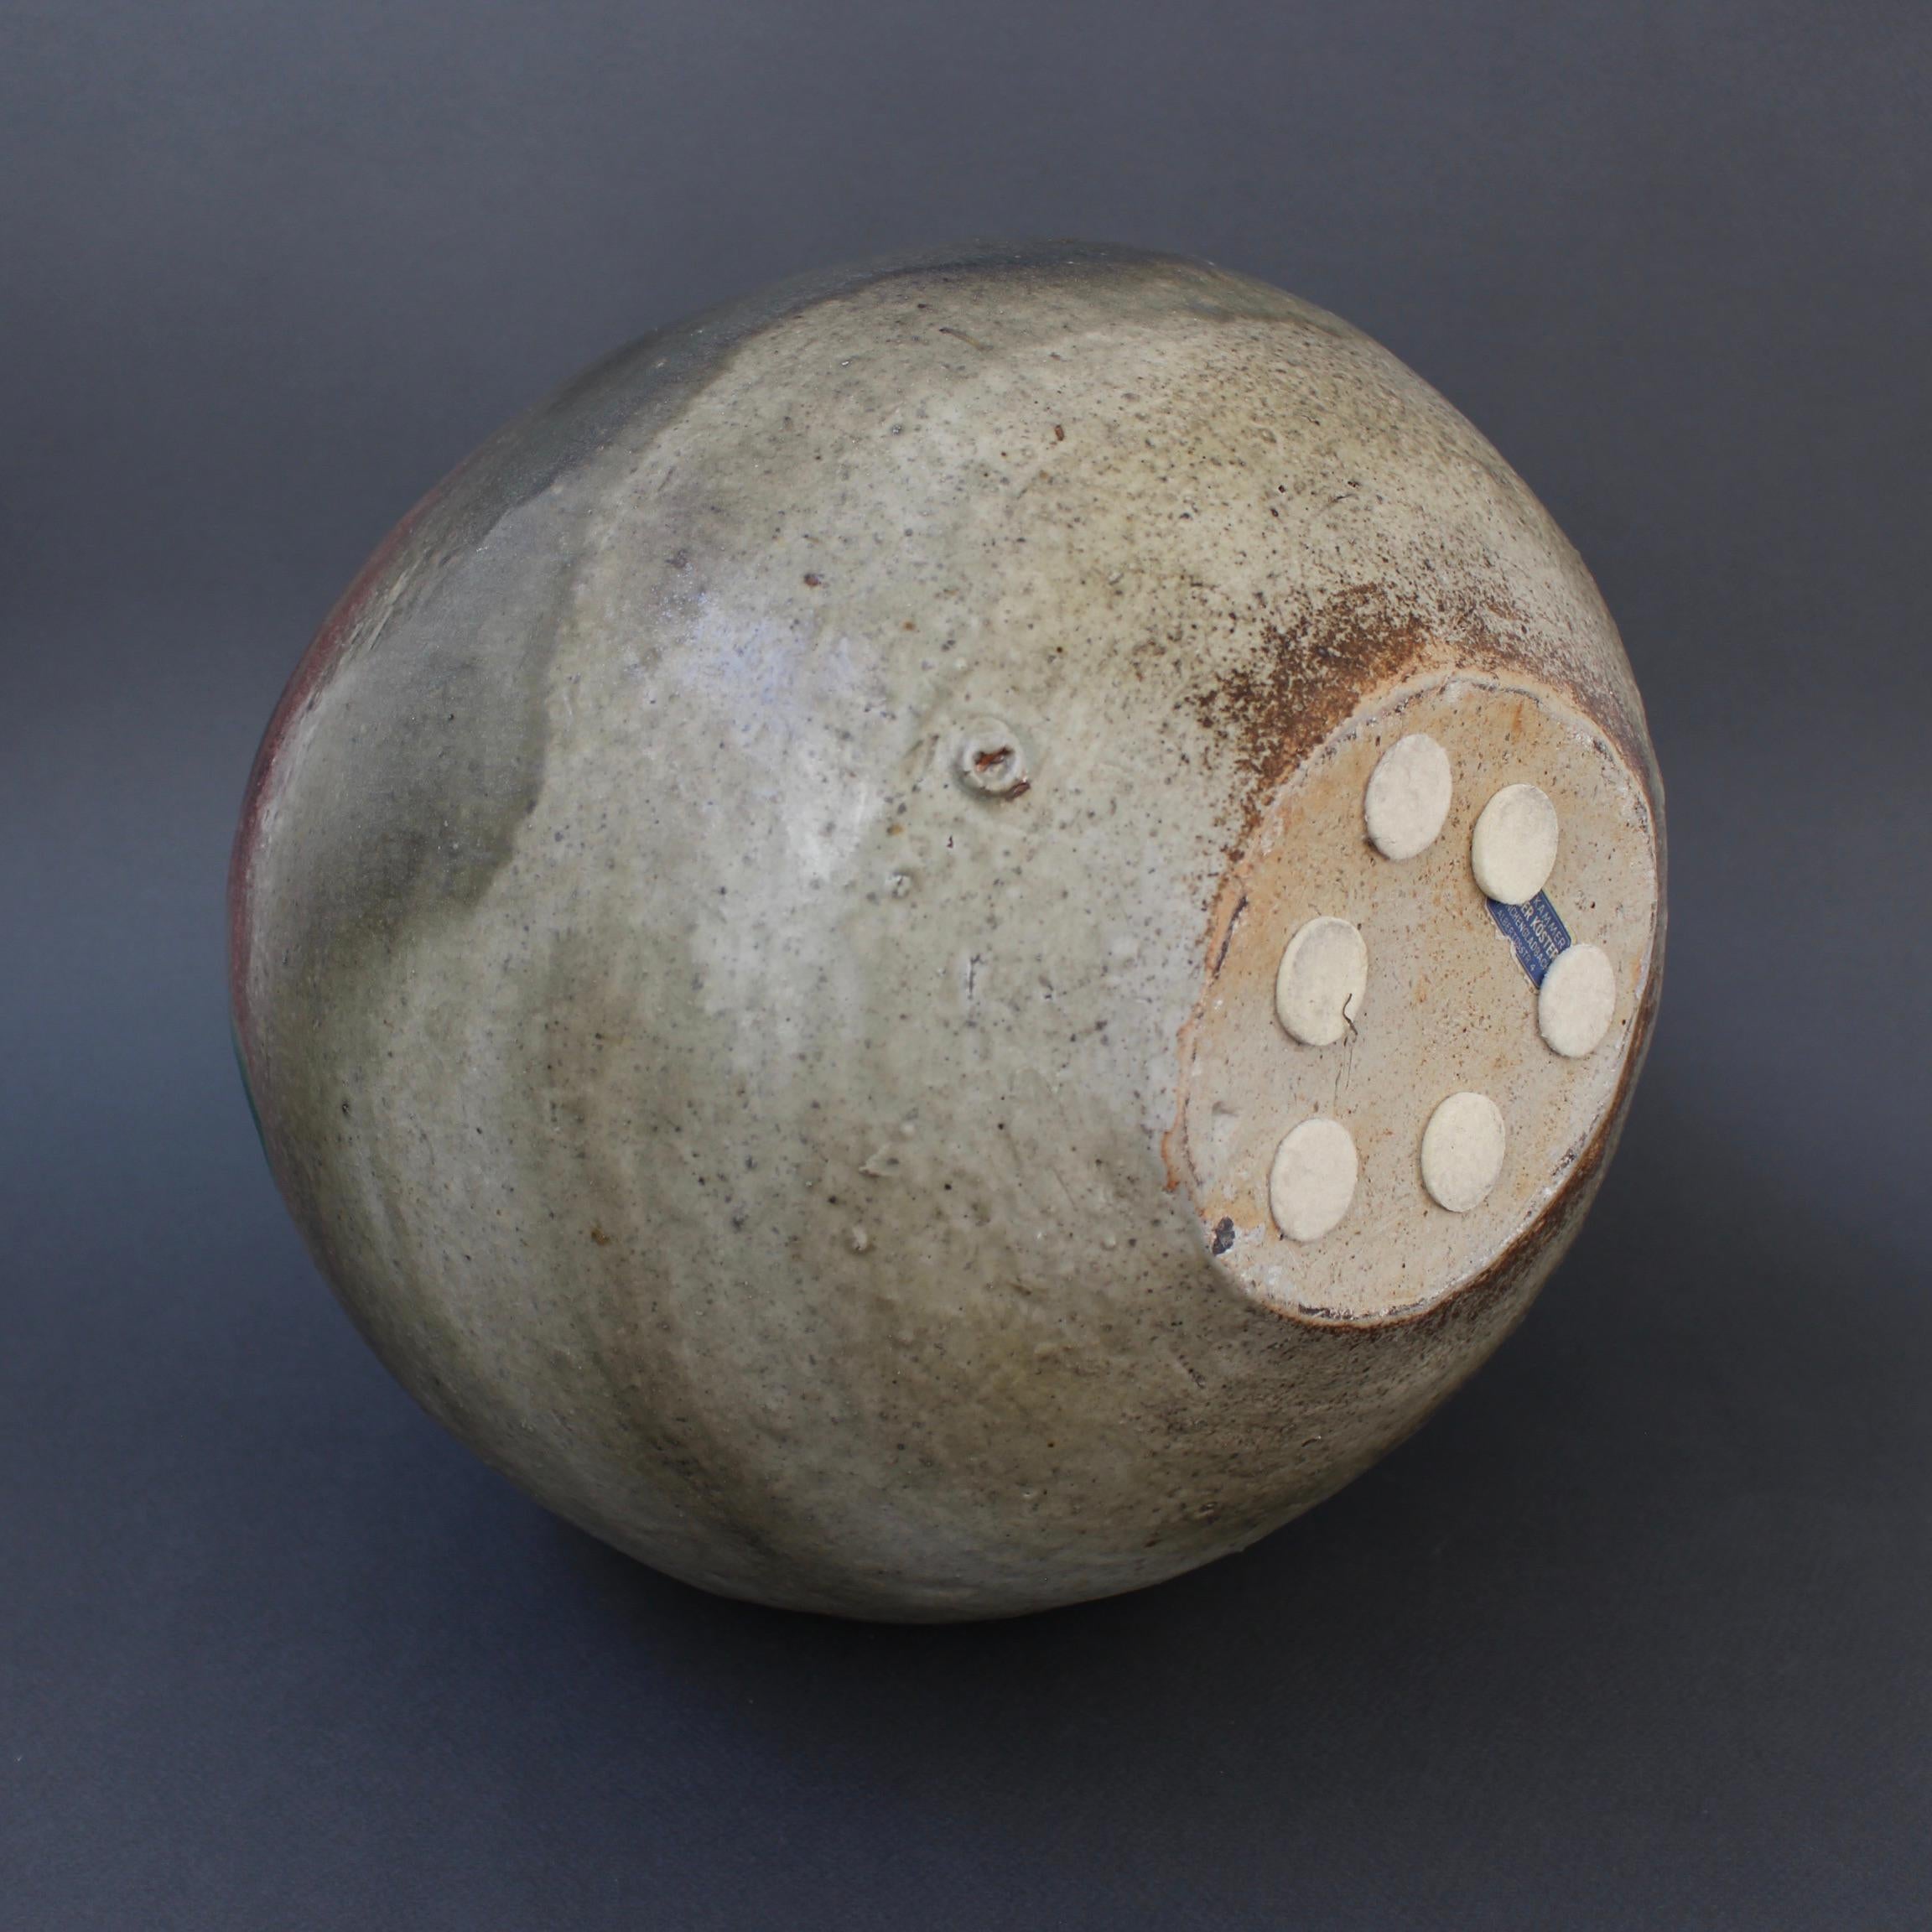 Large Spherical Stoneware Flower Vase by Ingeborg and Bruno Asshoff 'c. 1960s' For Sale 7